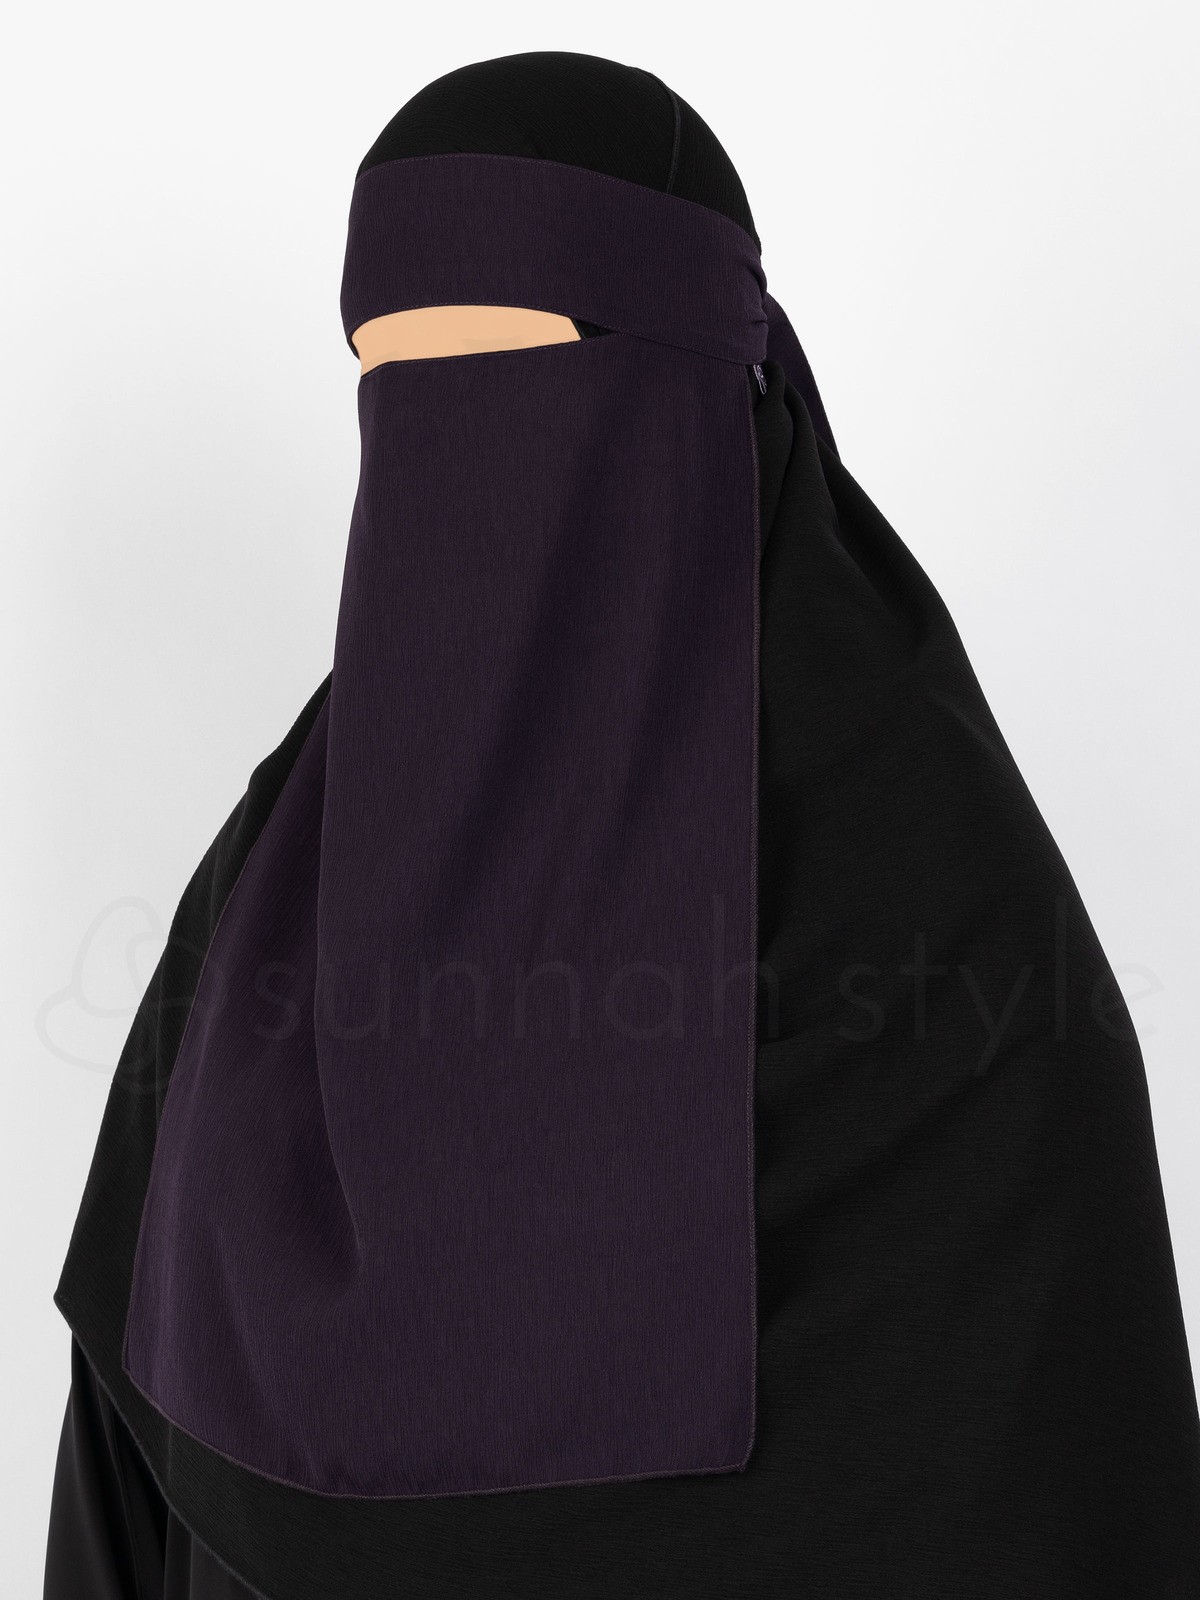 Sunnah Style - Brushed One Layer Niqab (Blackberry)